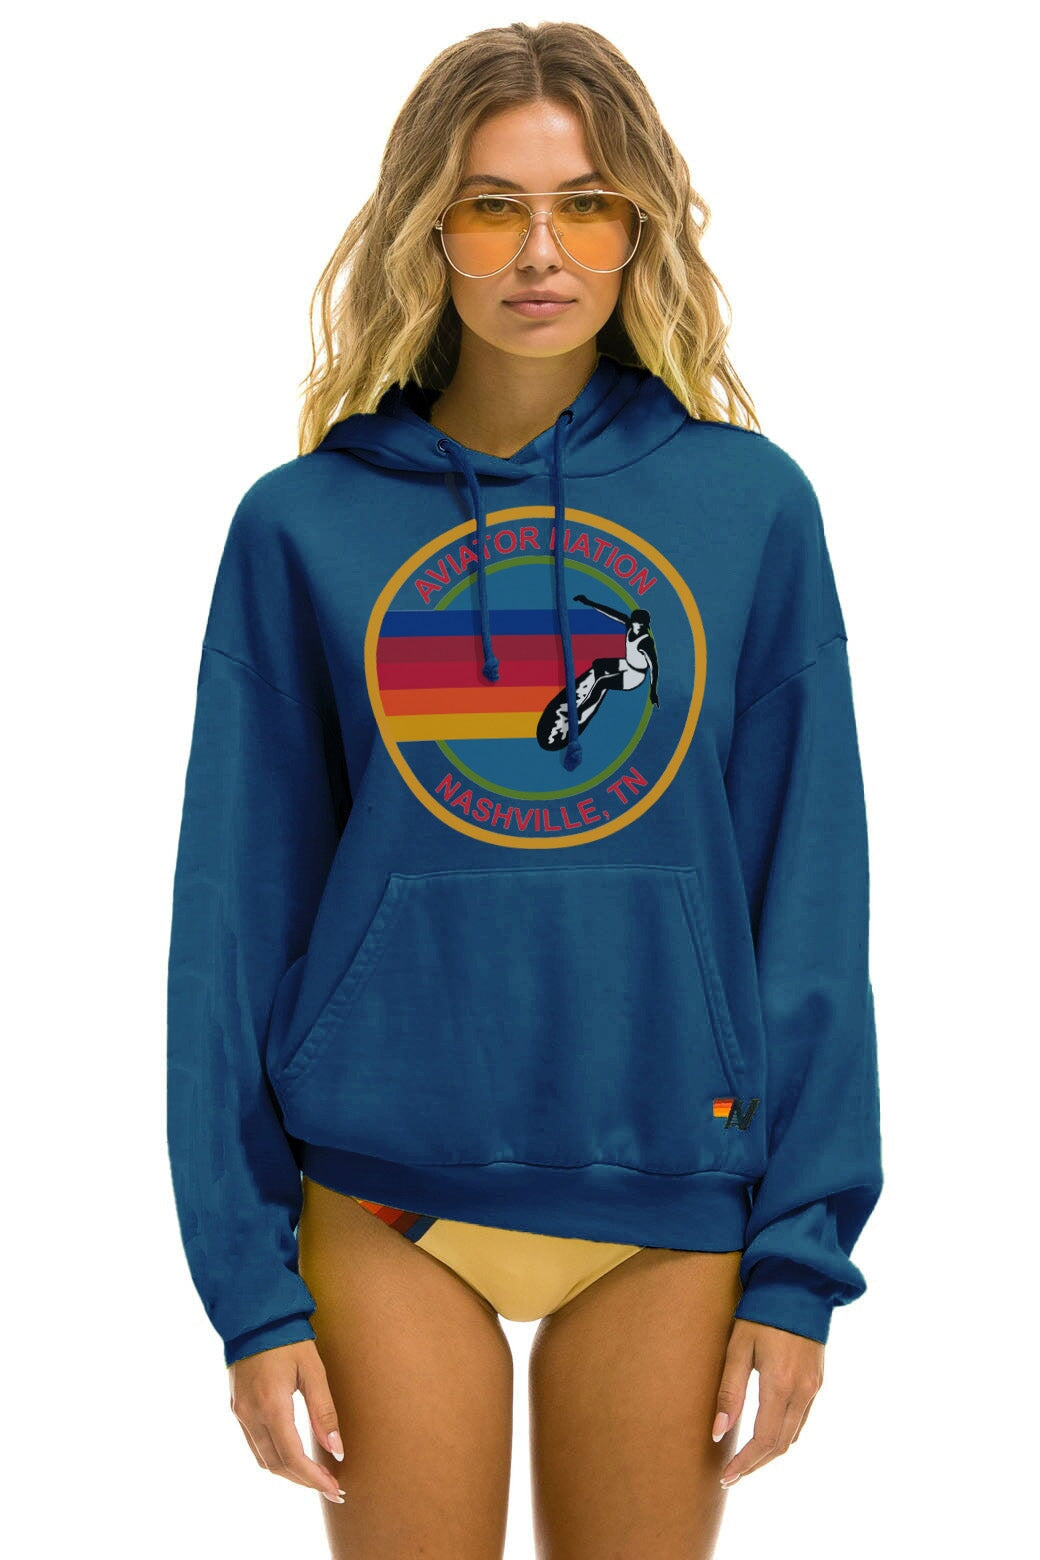 AVIATOR NATION NASHVILLE RELAXED PULLOVER HOODIE - ROYAL Hoodie Aviator Nation 